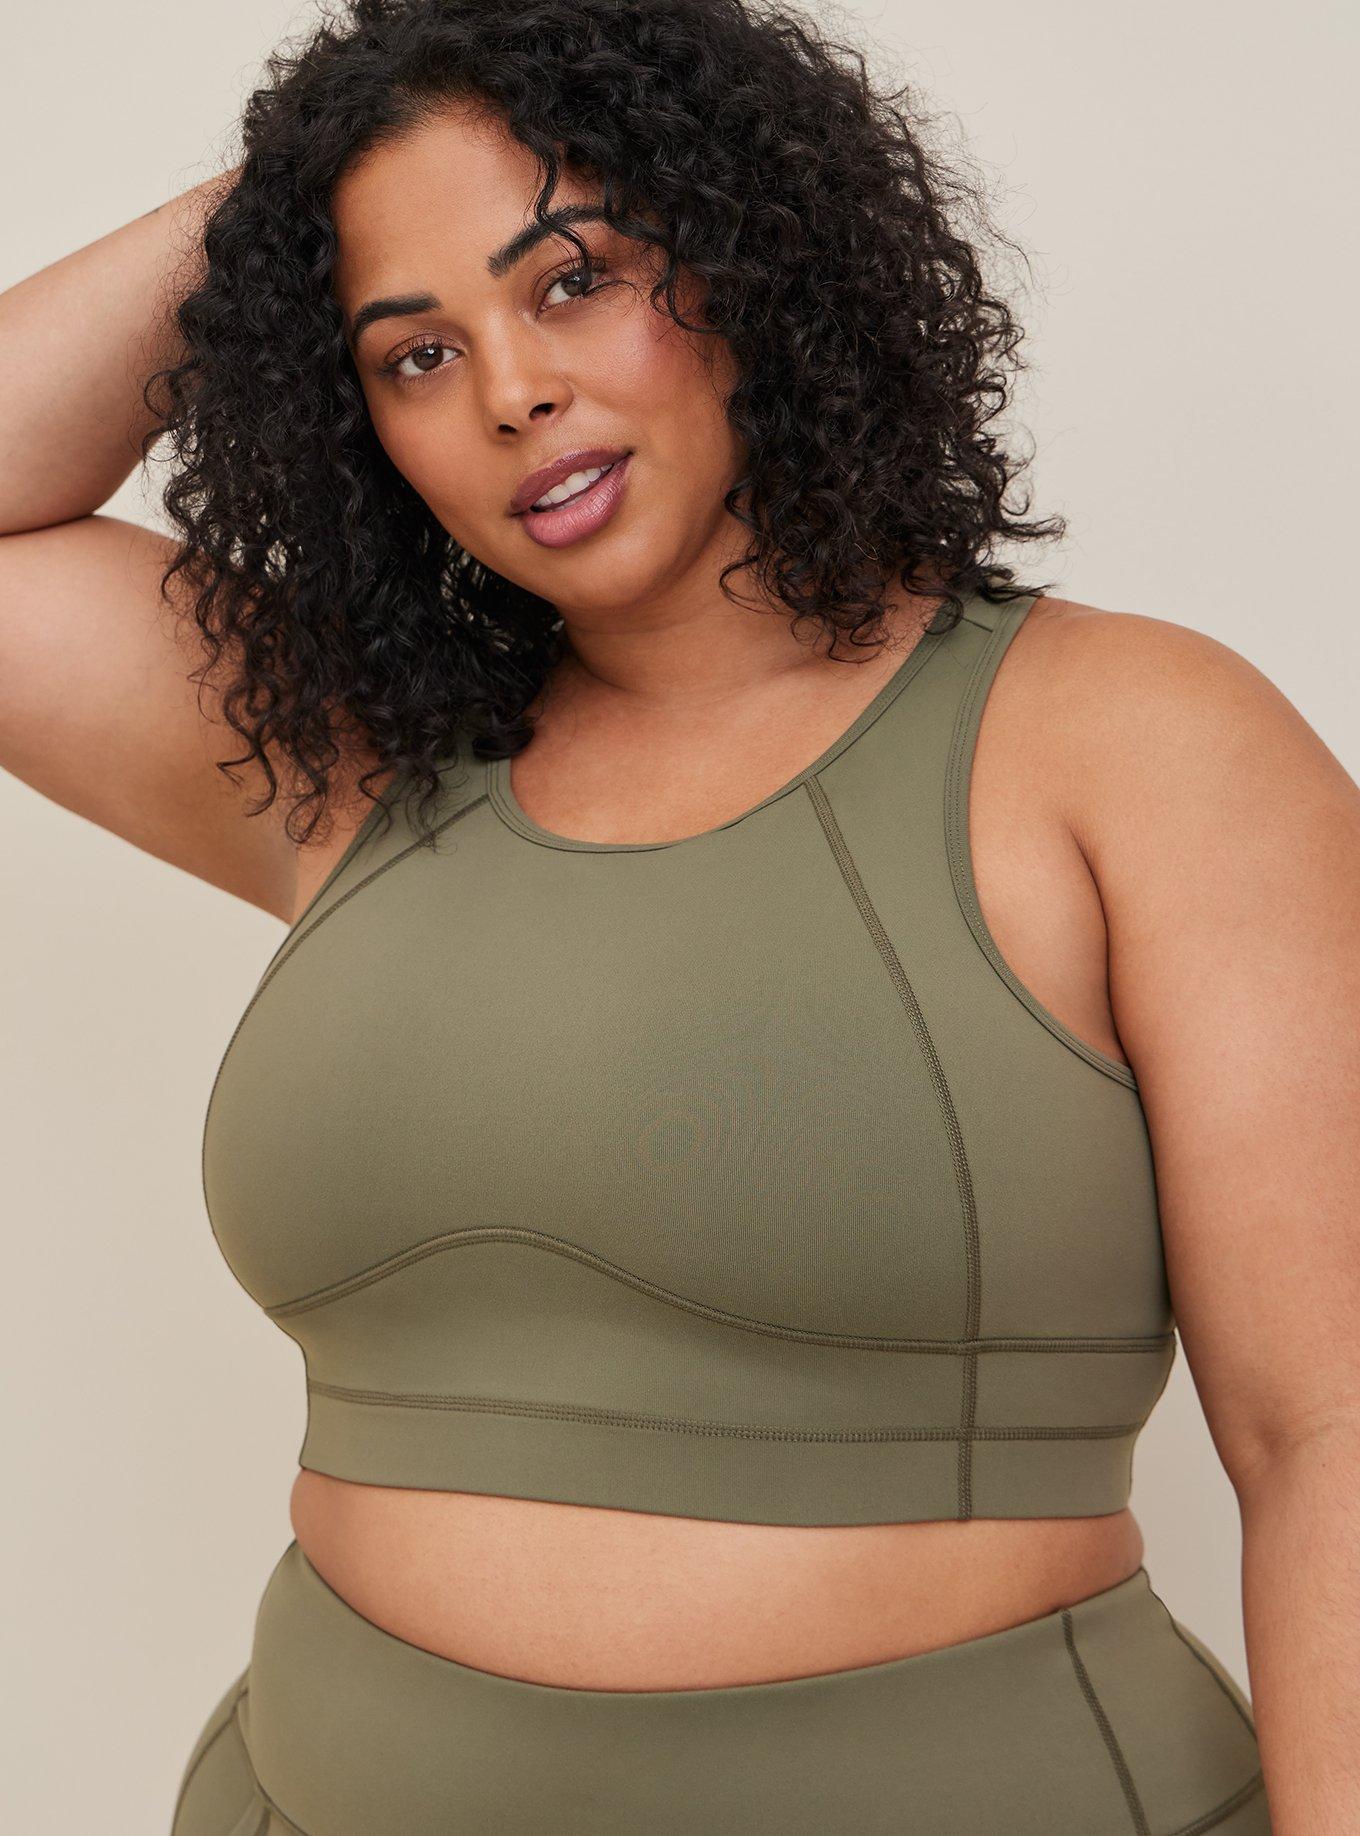   Essentials Women's Ribbed Lounge Unlined Scoop Neck  Bralette, Pack of 2, Blush/Olive, XX-Small : Clothing, Shoes & Jewelry